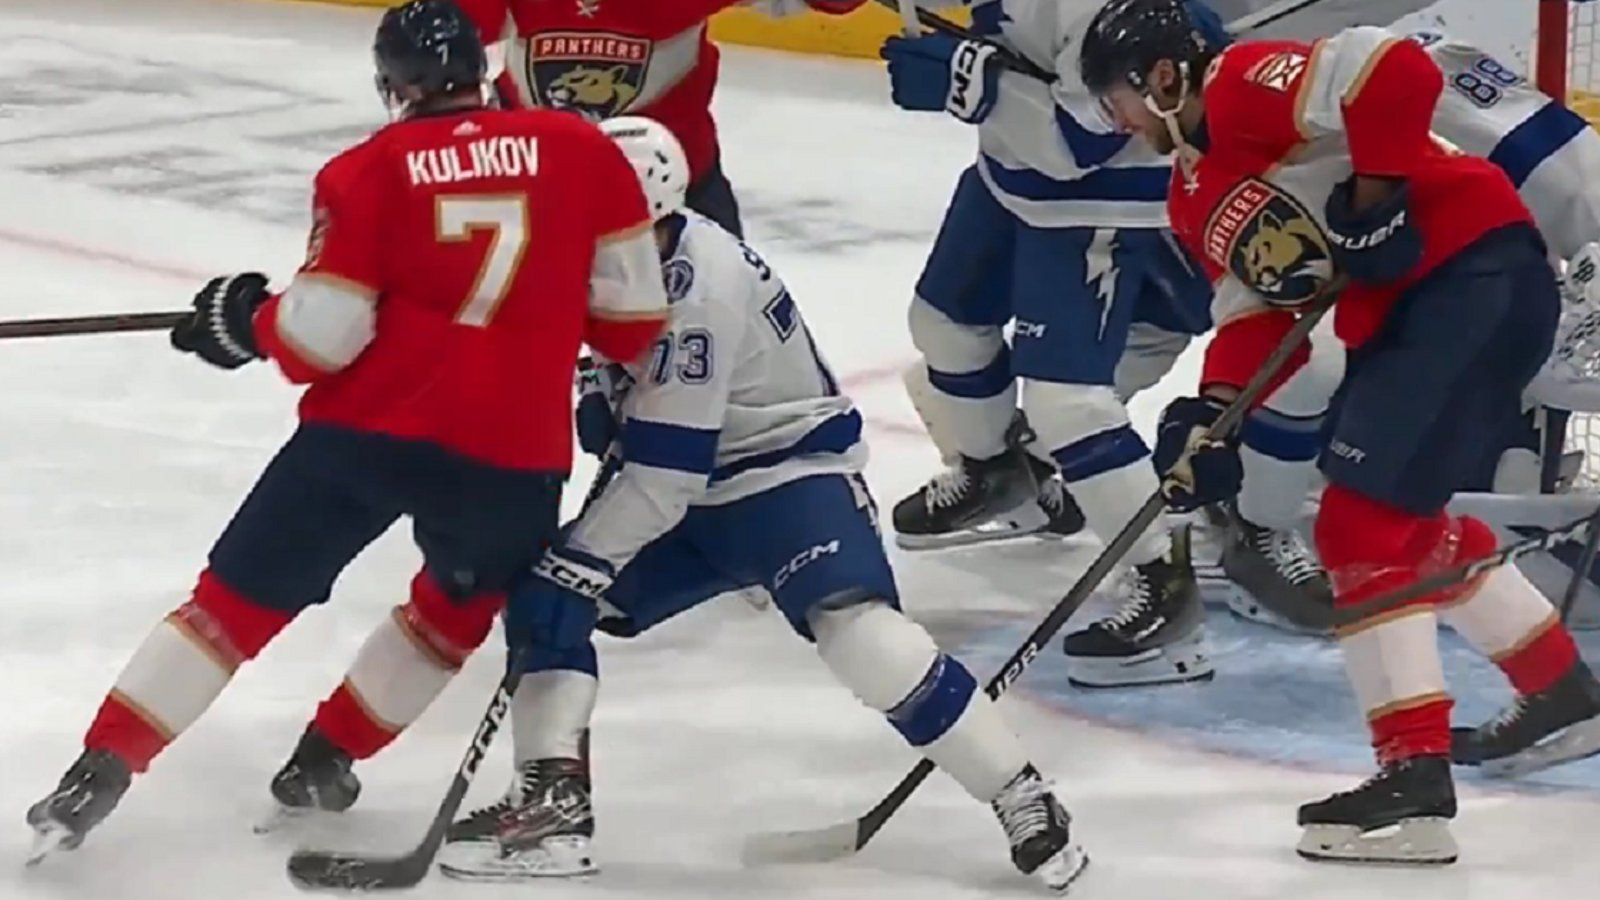 Dmitry Kulikov facing suspension for hit on Conor Sheary.